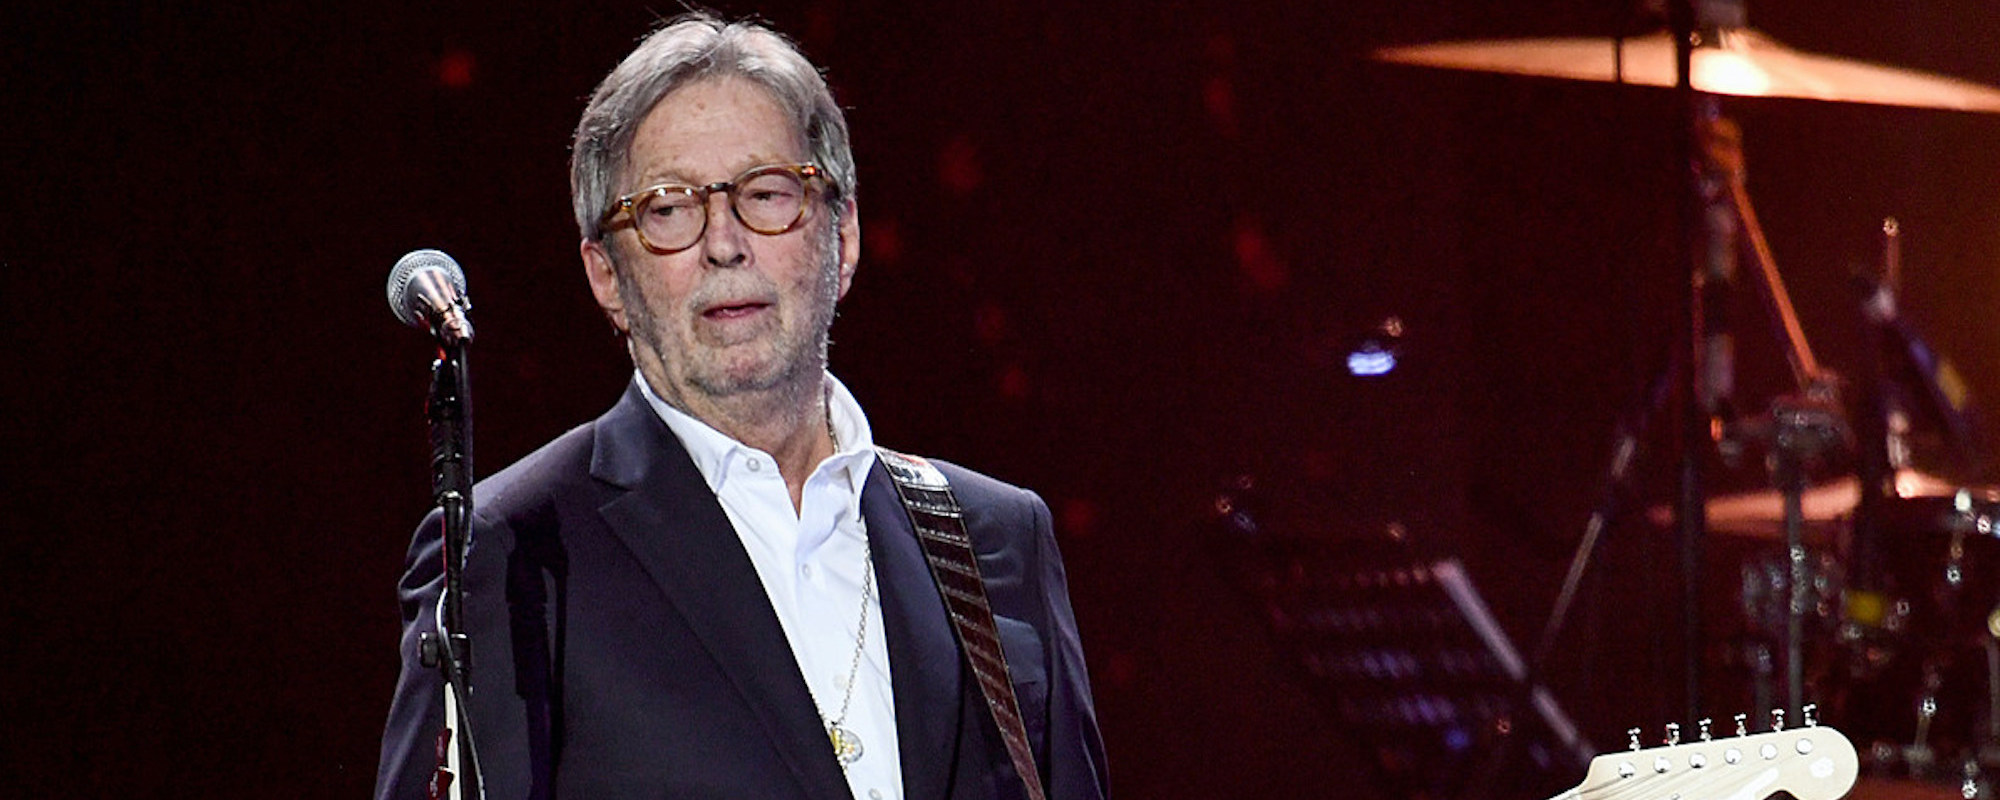 Eric Clapton Releases New Apparent Anti-Mask Protest Song